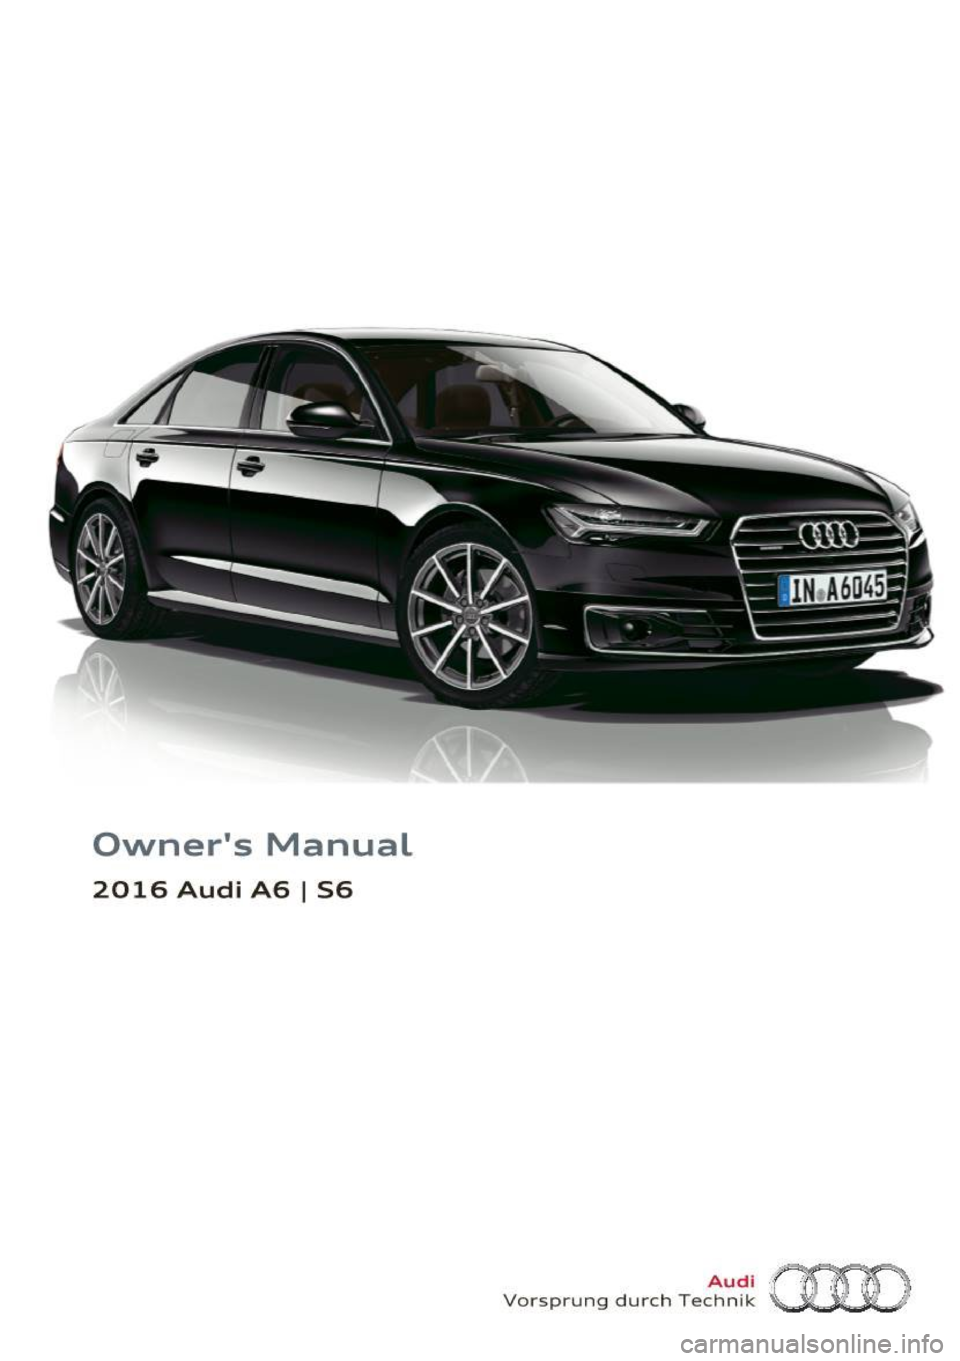 AUDI A6 2016  Owners Manual owners Manual 
2016 Audi A6 
I S6  